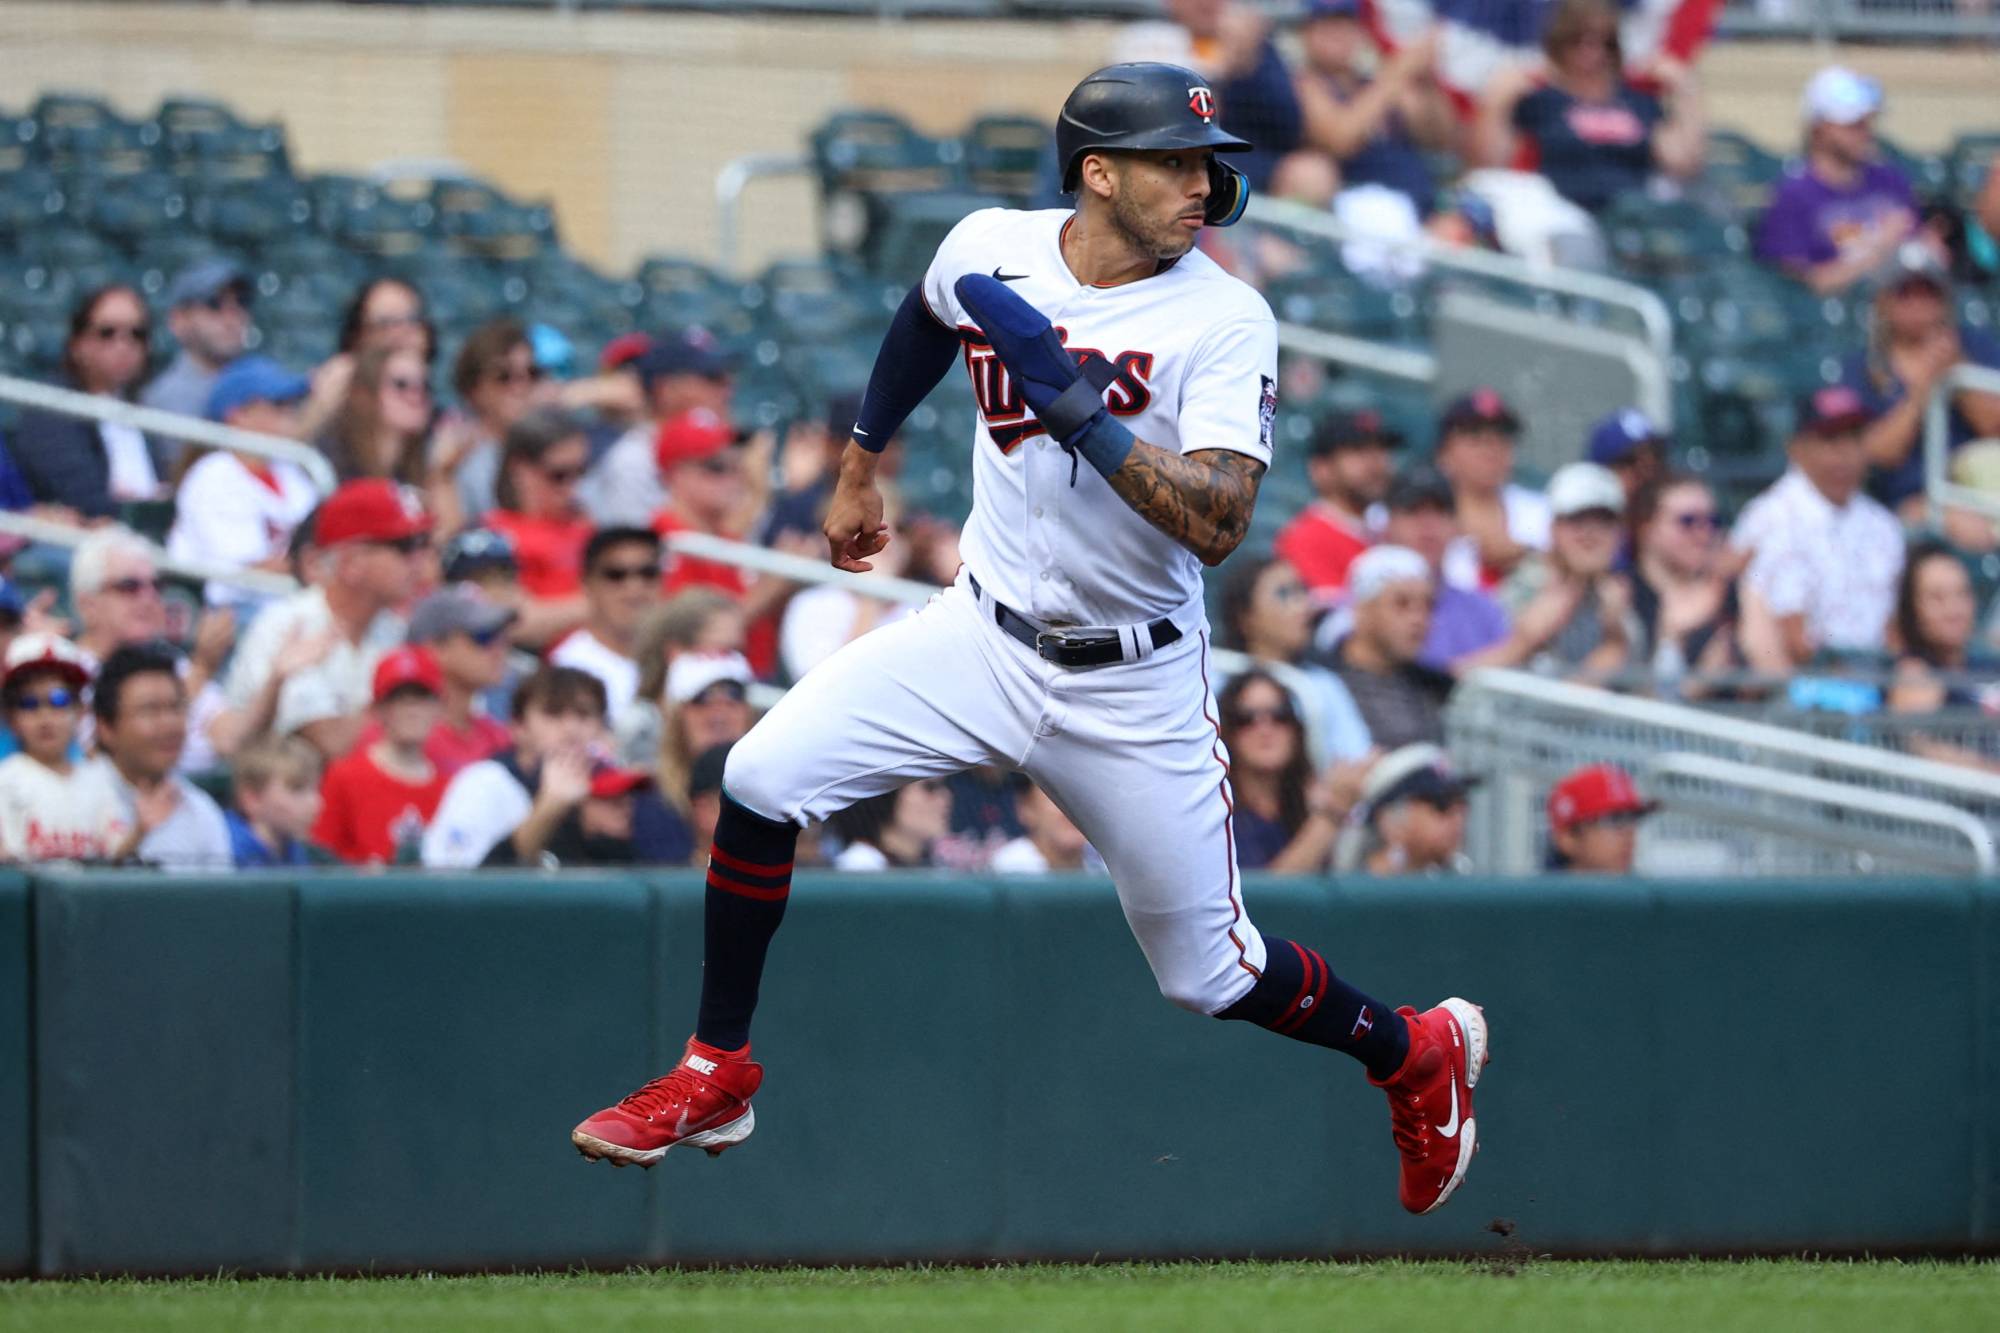 Minnesota Twins shortstop Carlos Correa runs home to score against the Los Angeles Angels at Target Field in Minnesota on Sept. 25.  | USA TODAY / VIA REUTERS